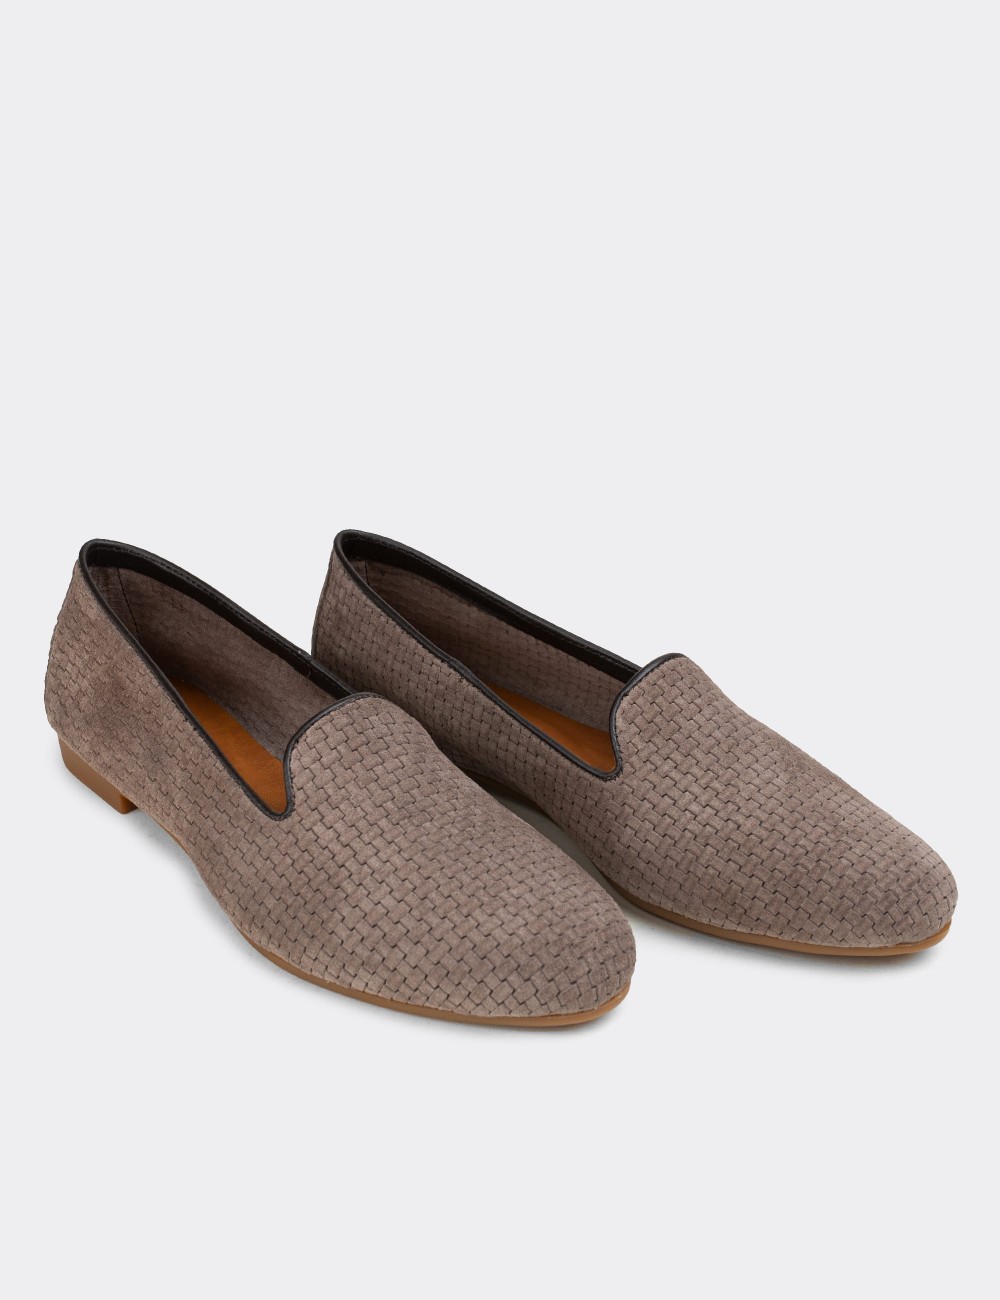 Sandstone Suede Leather Loafers  - E3208ZVZNC02